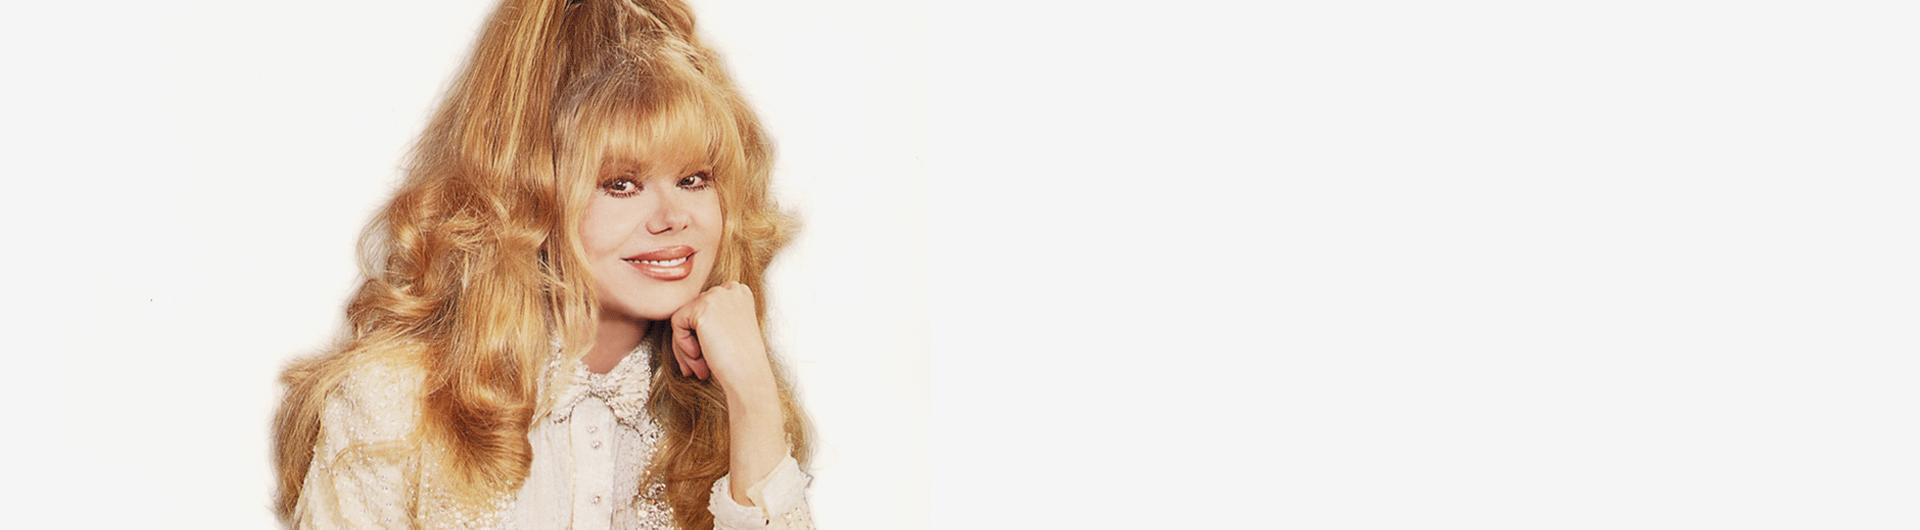 Charo in a light blouse smiles at the camera.